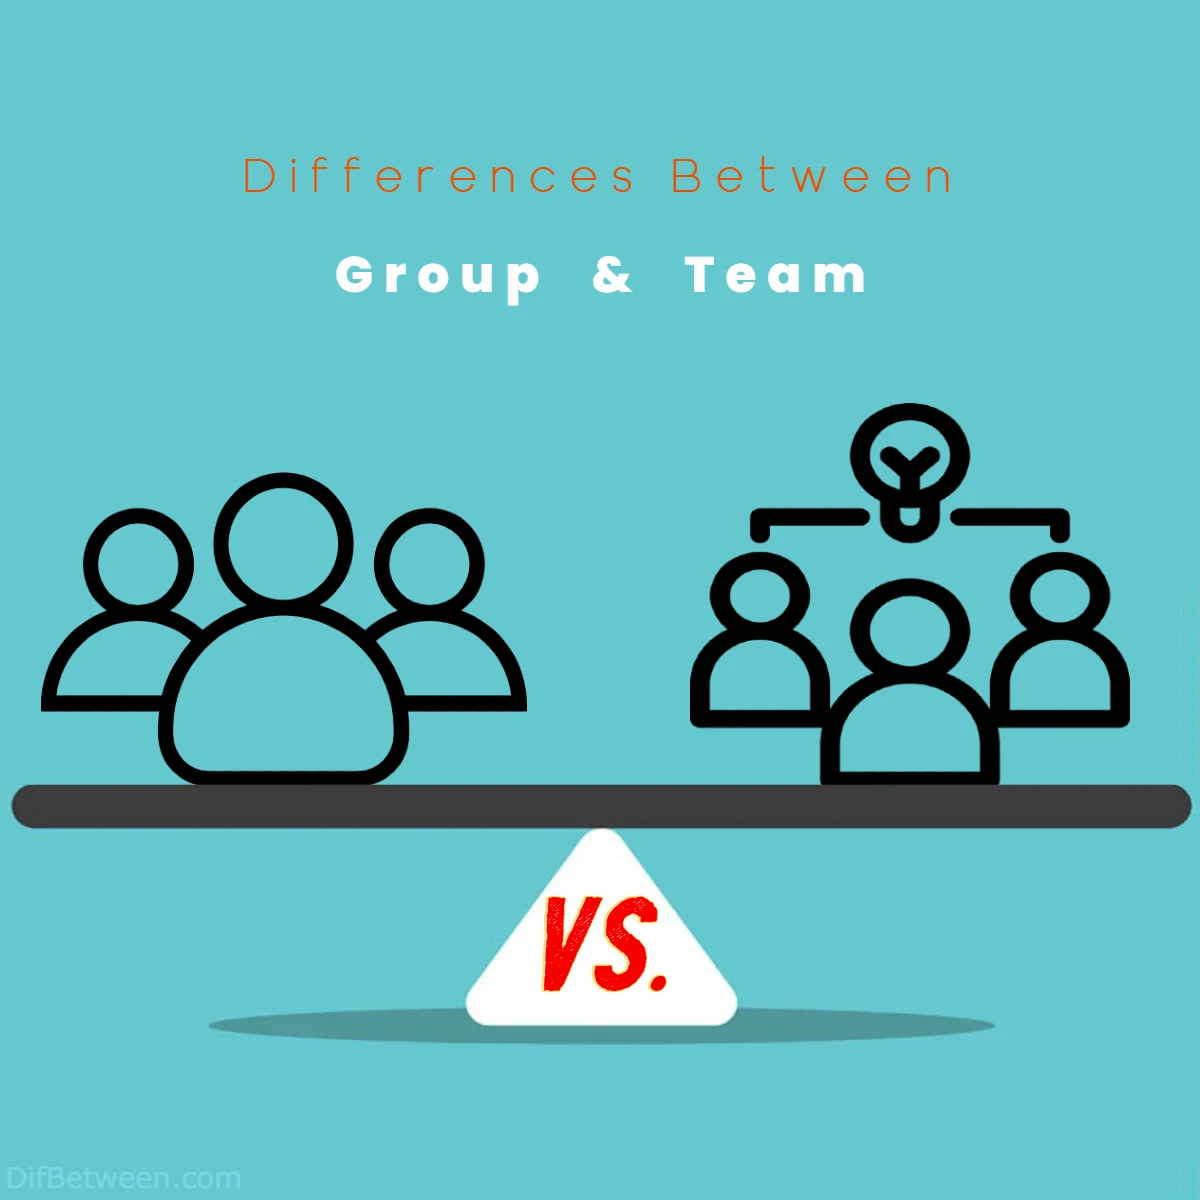 Differences Between Group vs Team